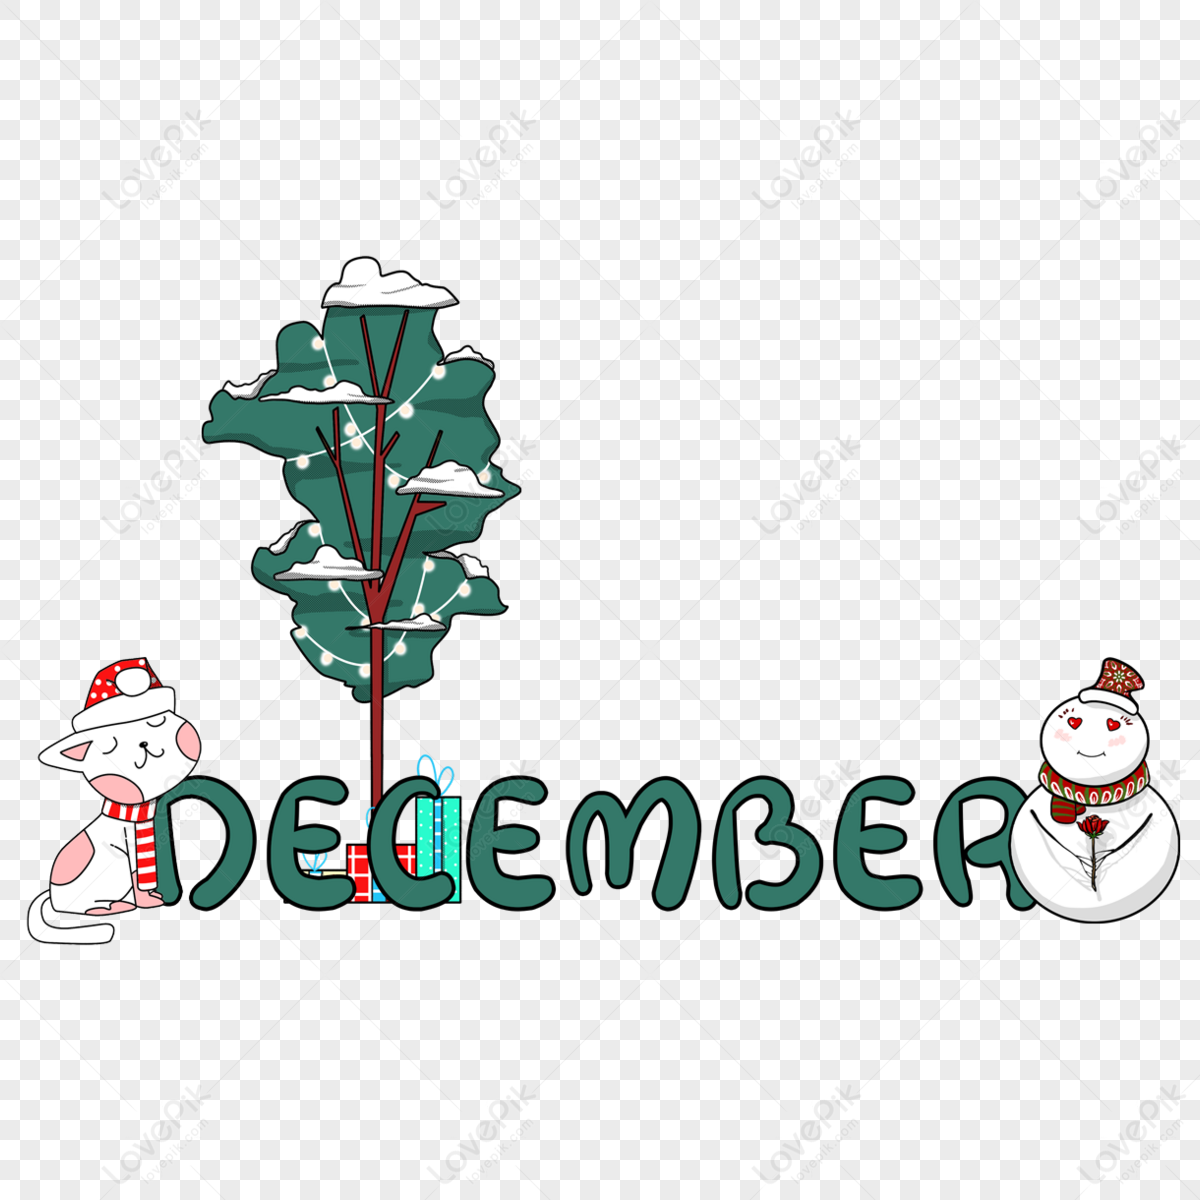 free animated december clipart image